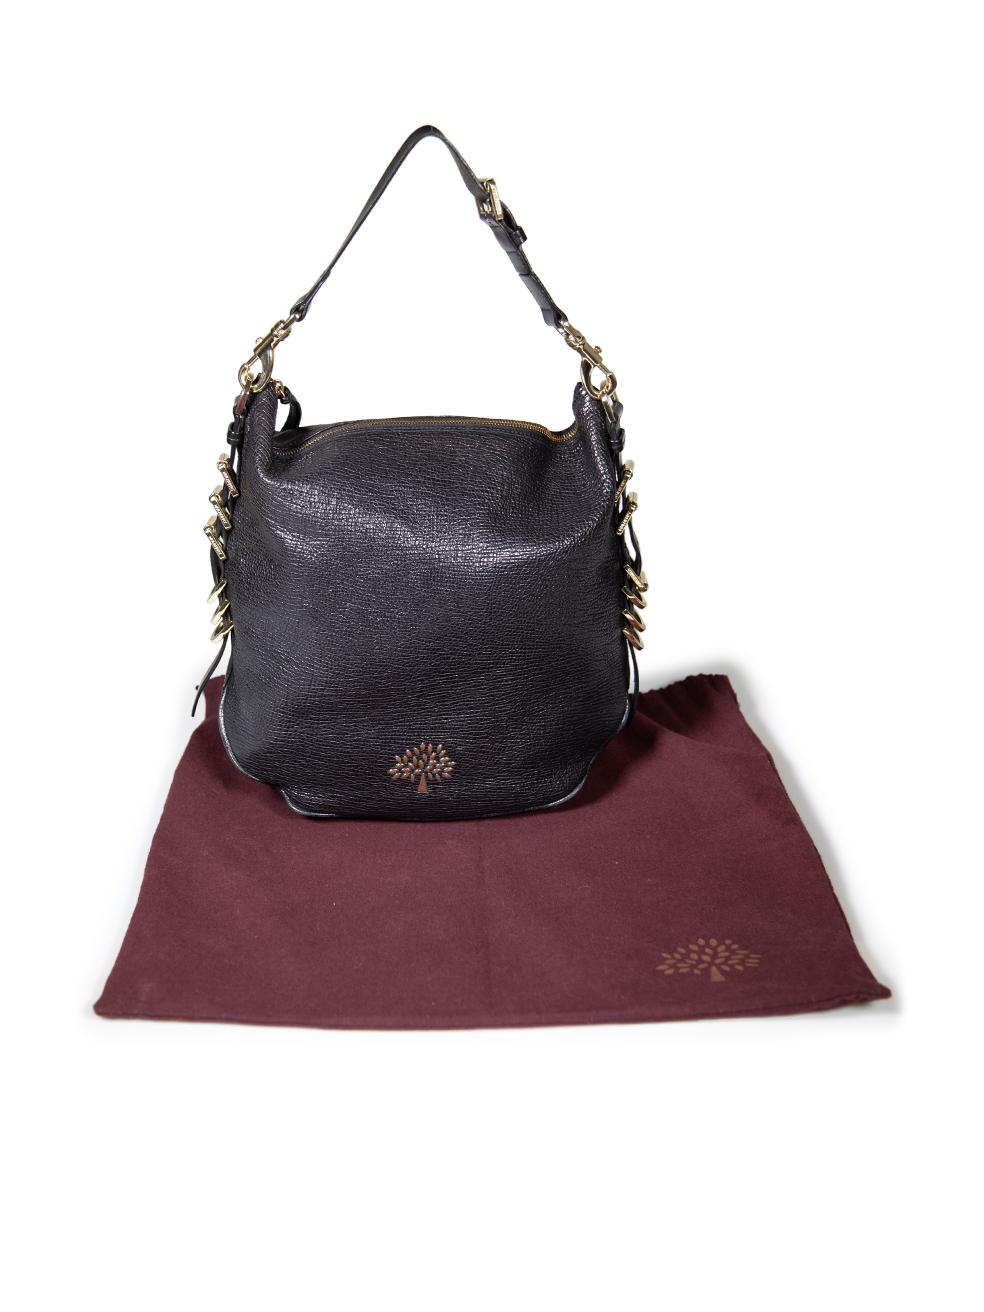 Mulberry Black Leather Mila Hobo For Sale 4